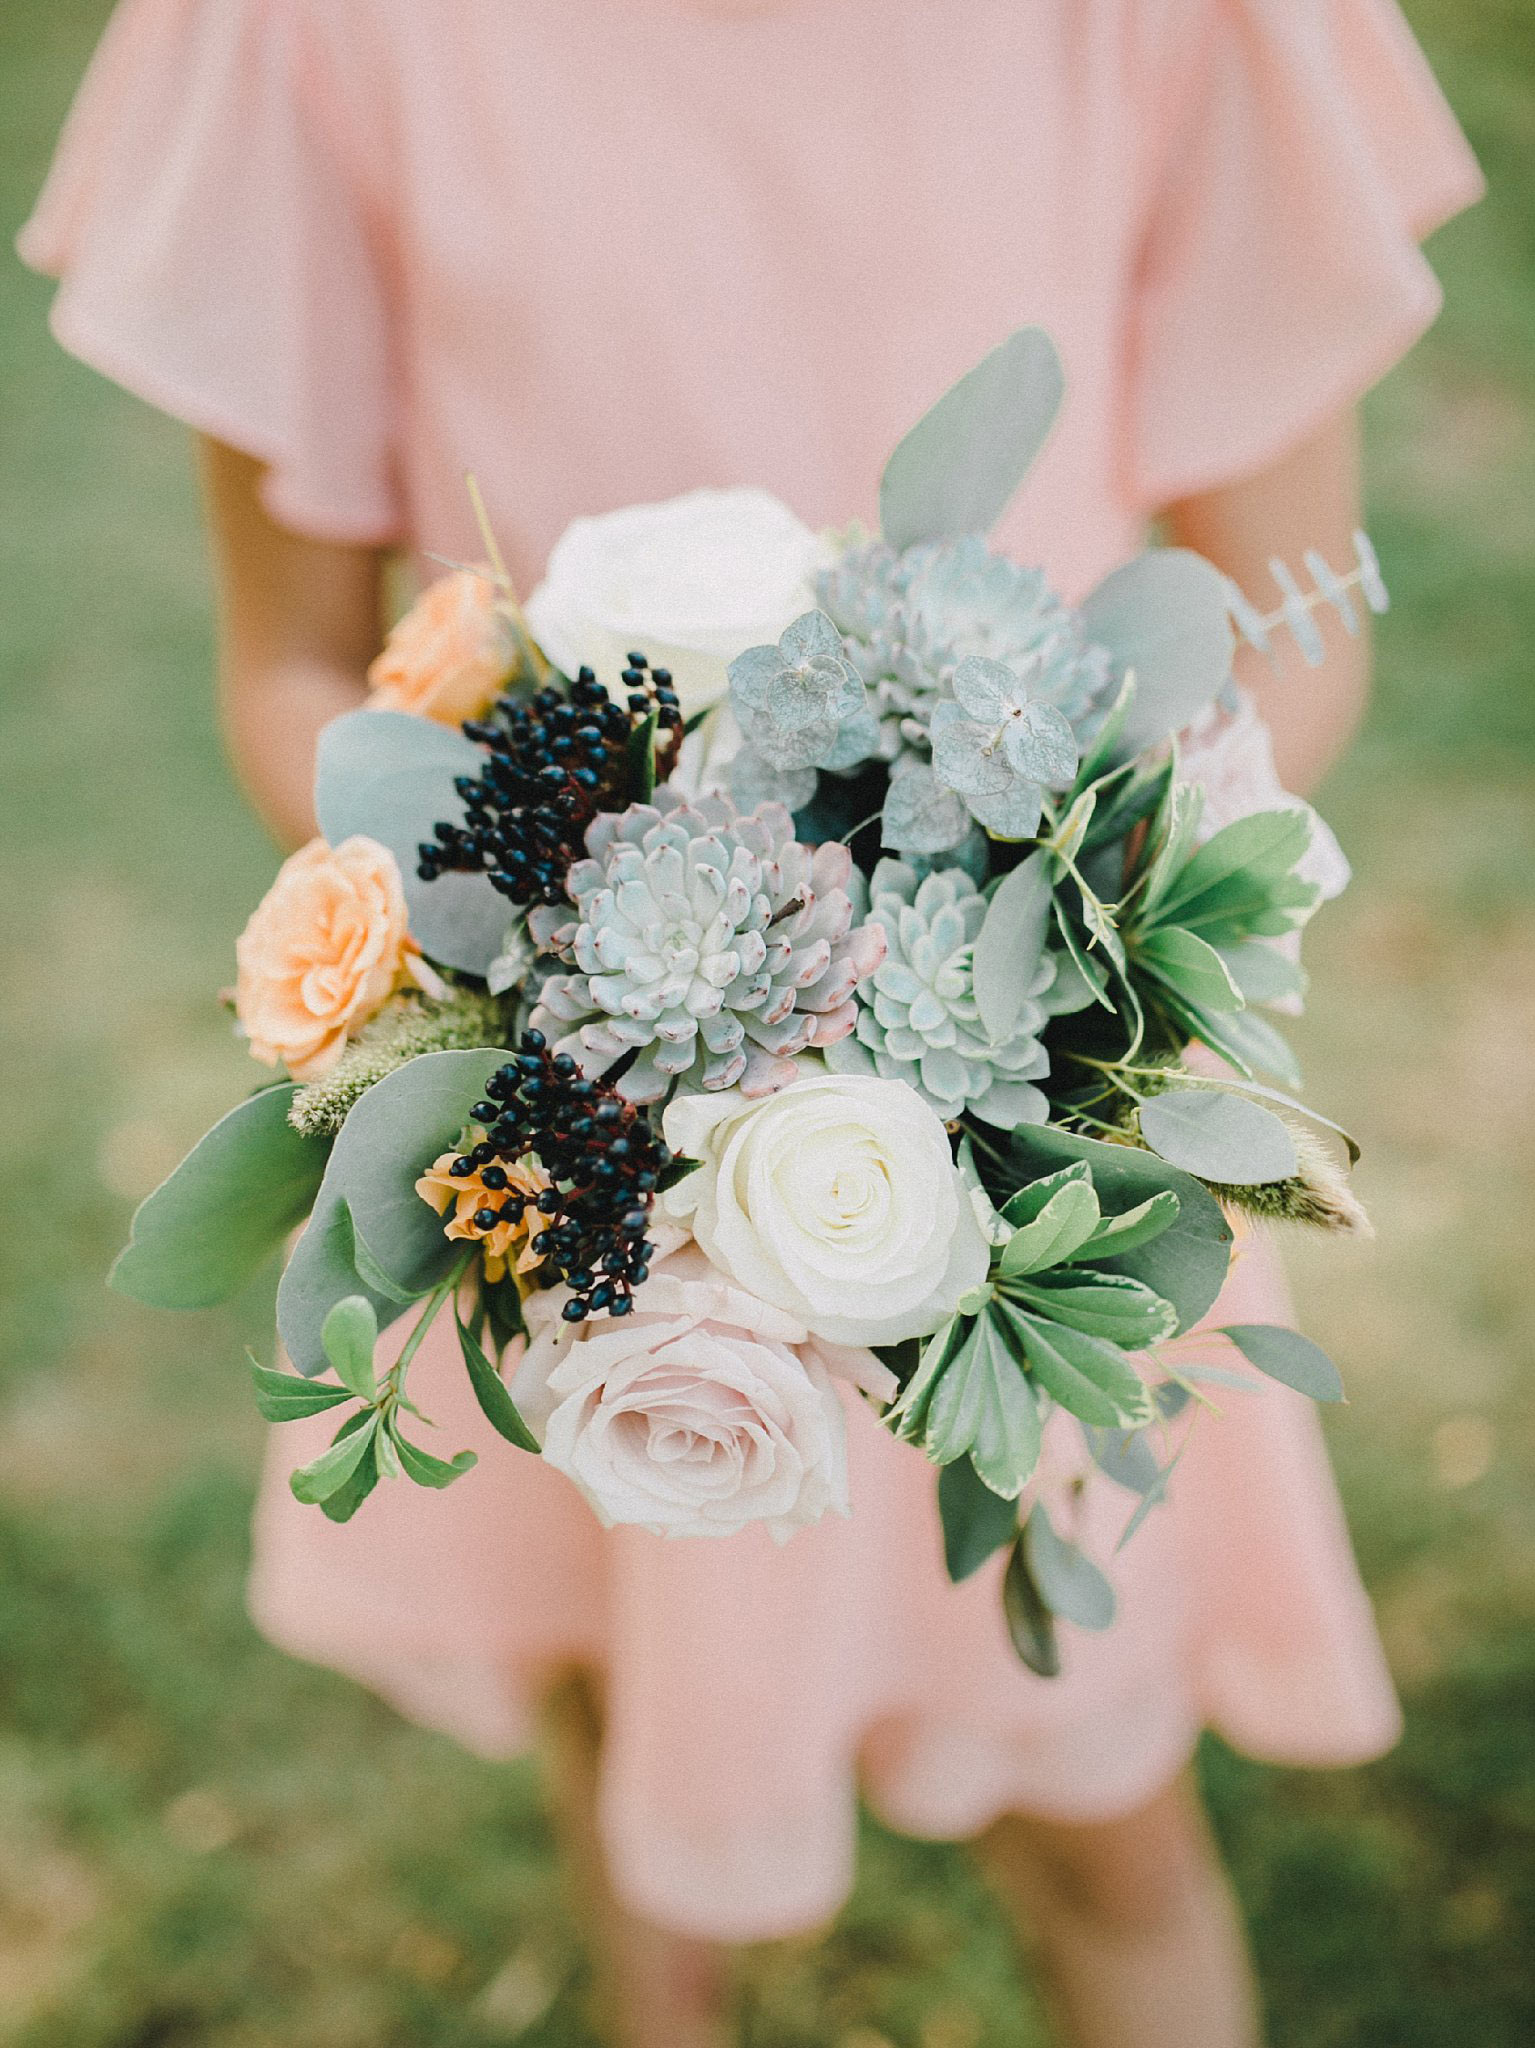 Navy, apricot, white, and green bridesmaid wedding bouquet